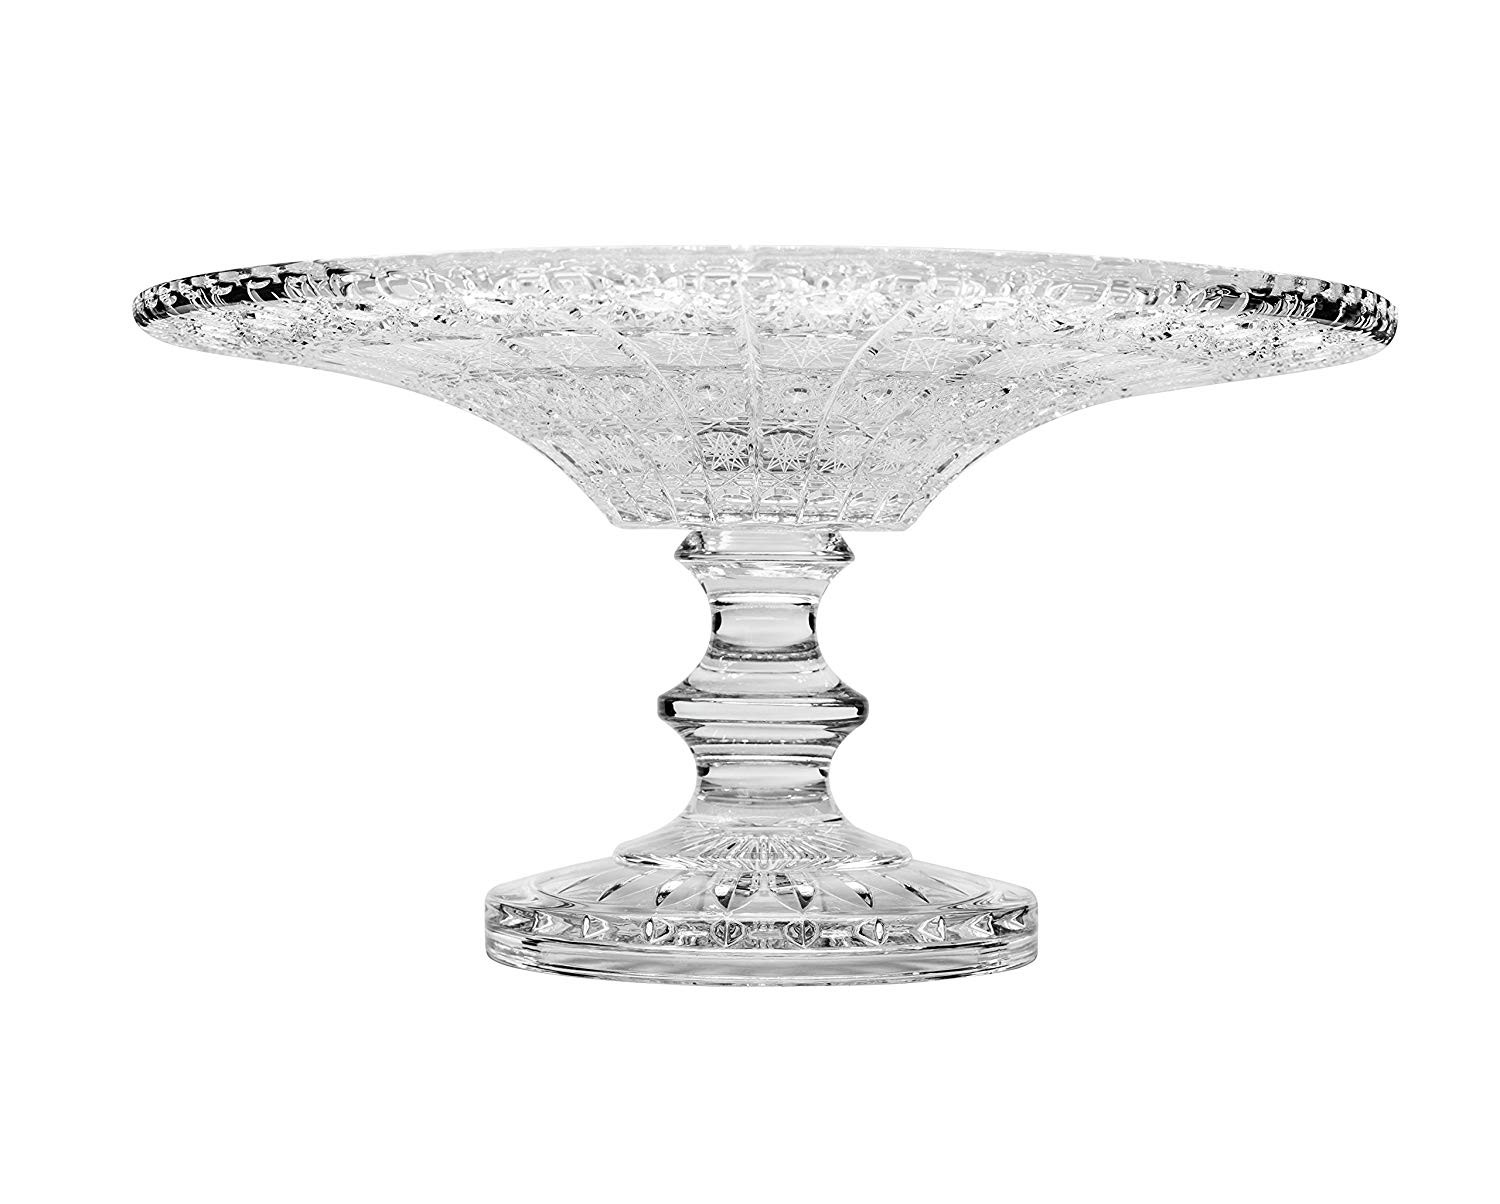 27 attractive Bohemia Crystal Vase Price 2024 free download bohemia crystal vase price of amazon com bohemia crystal footed plate 14 dia round serving with regard to amazon com bohemia crystal footed plate 14 dia round serving cake stand decorative c